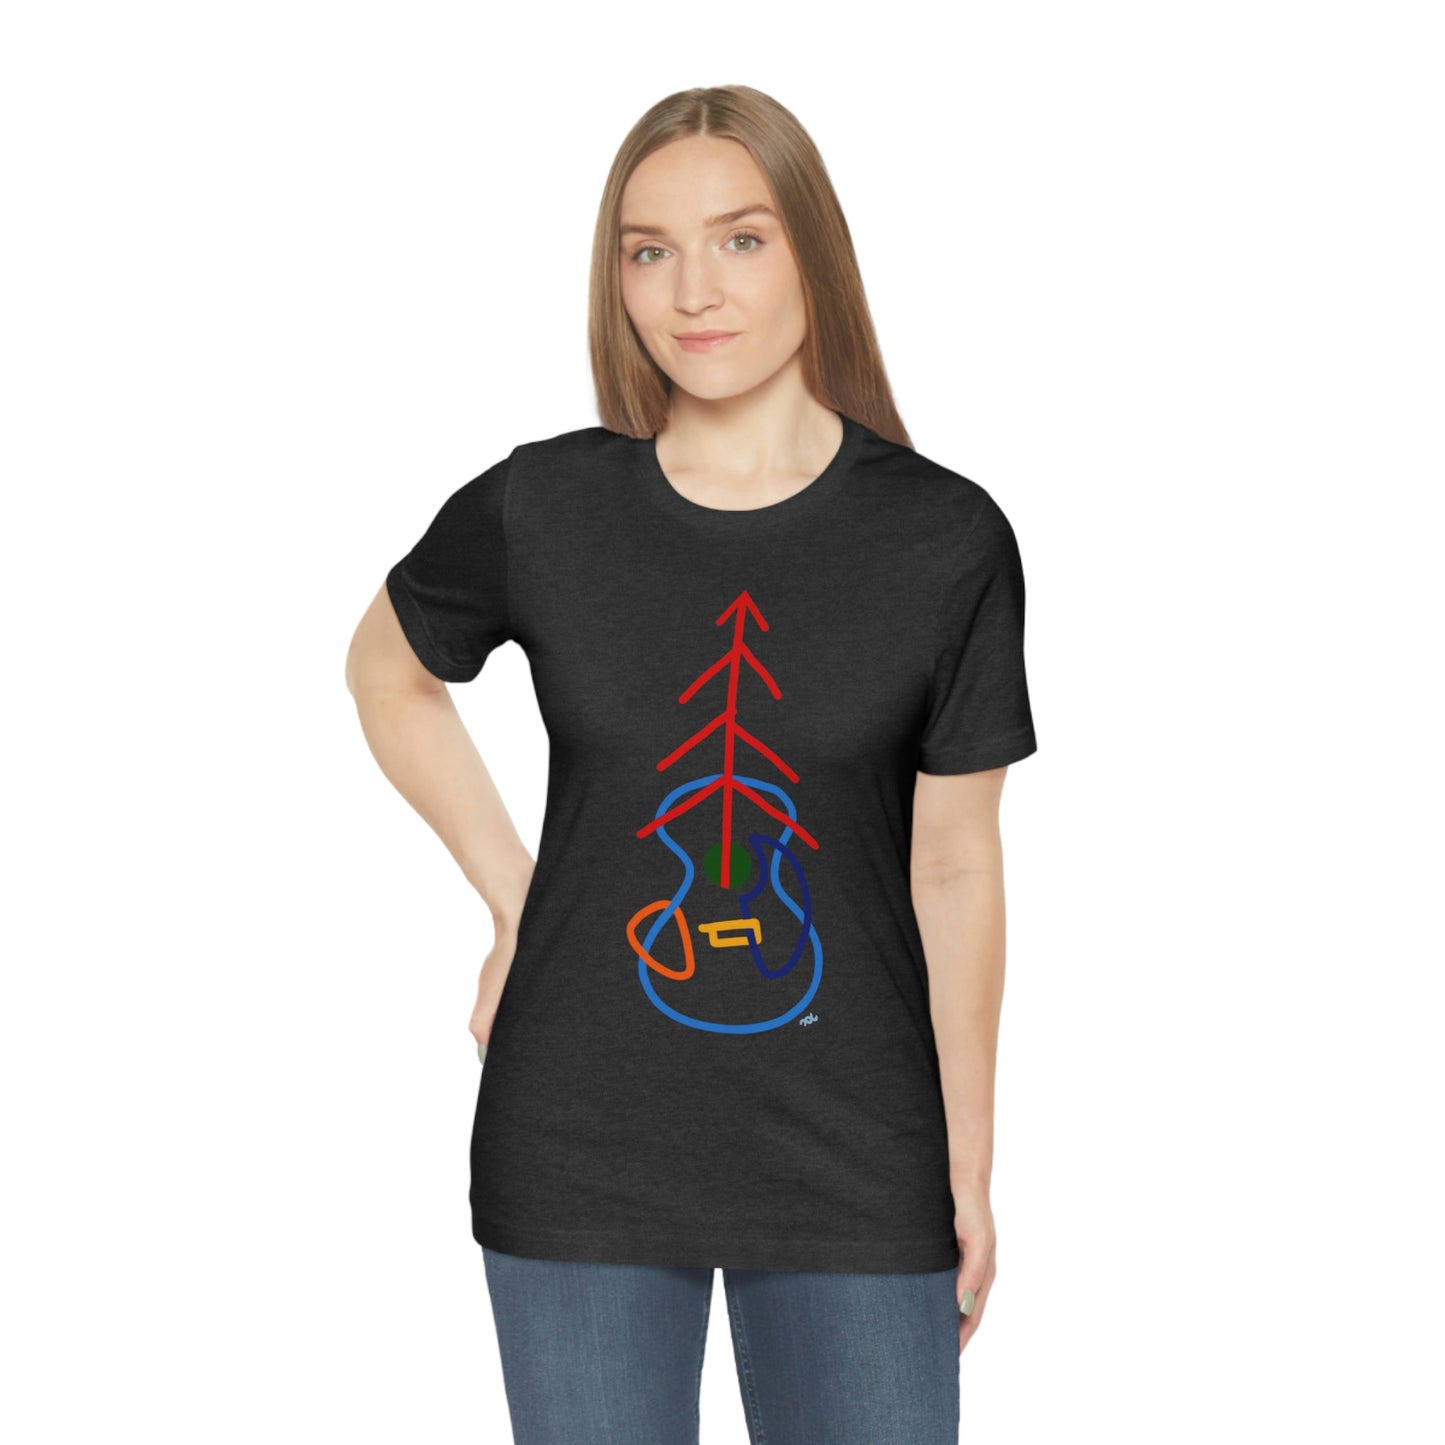 Lines Of Sound Short Sleeve Shirt